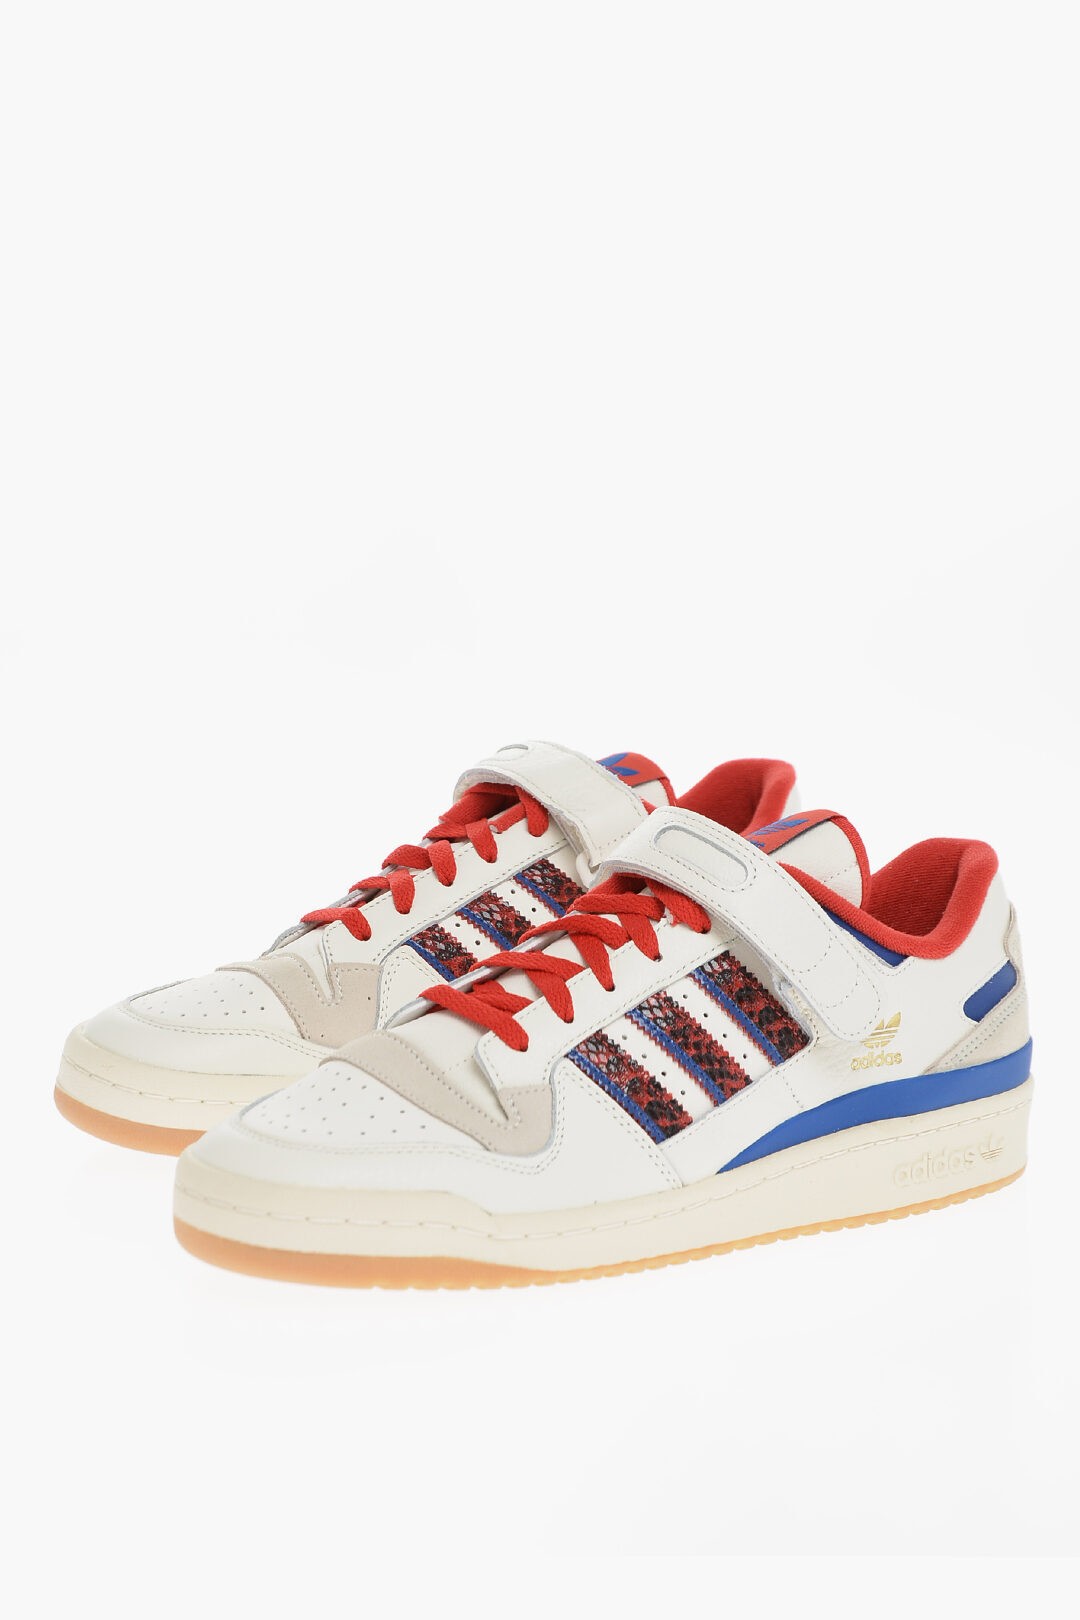 ADIDAS アディダス スニーカー GV9606LE WS メンズ LEATHER FORUM SNEAKERS WITH ANIMAL PRINTED INSERTS 【関税・送料無料】【ラッピング無料】 dk